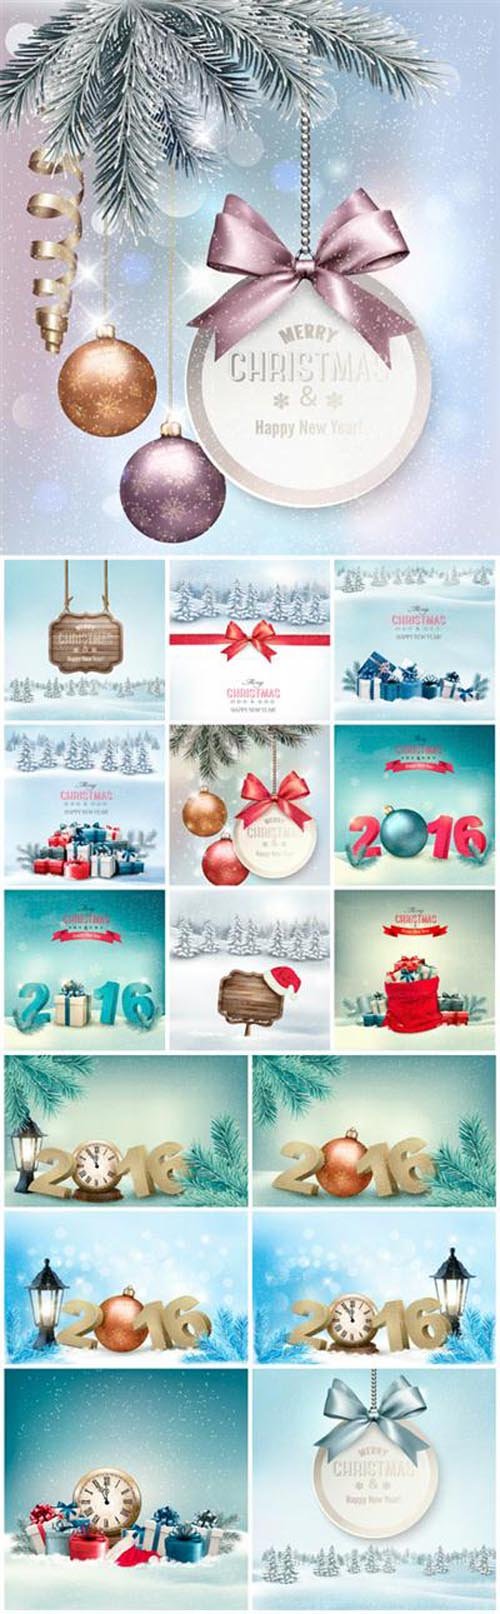 Holiday Christmas background with gift boxes and landscape